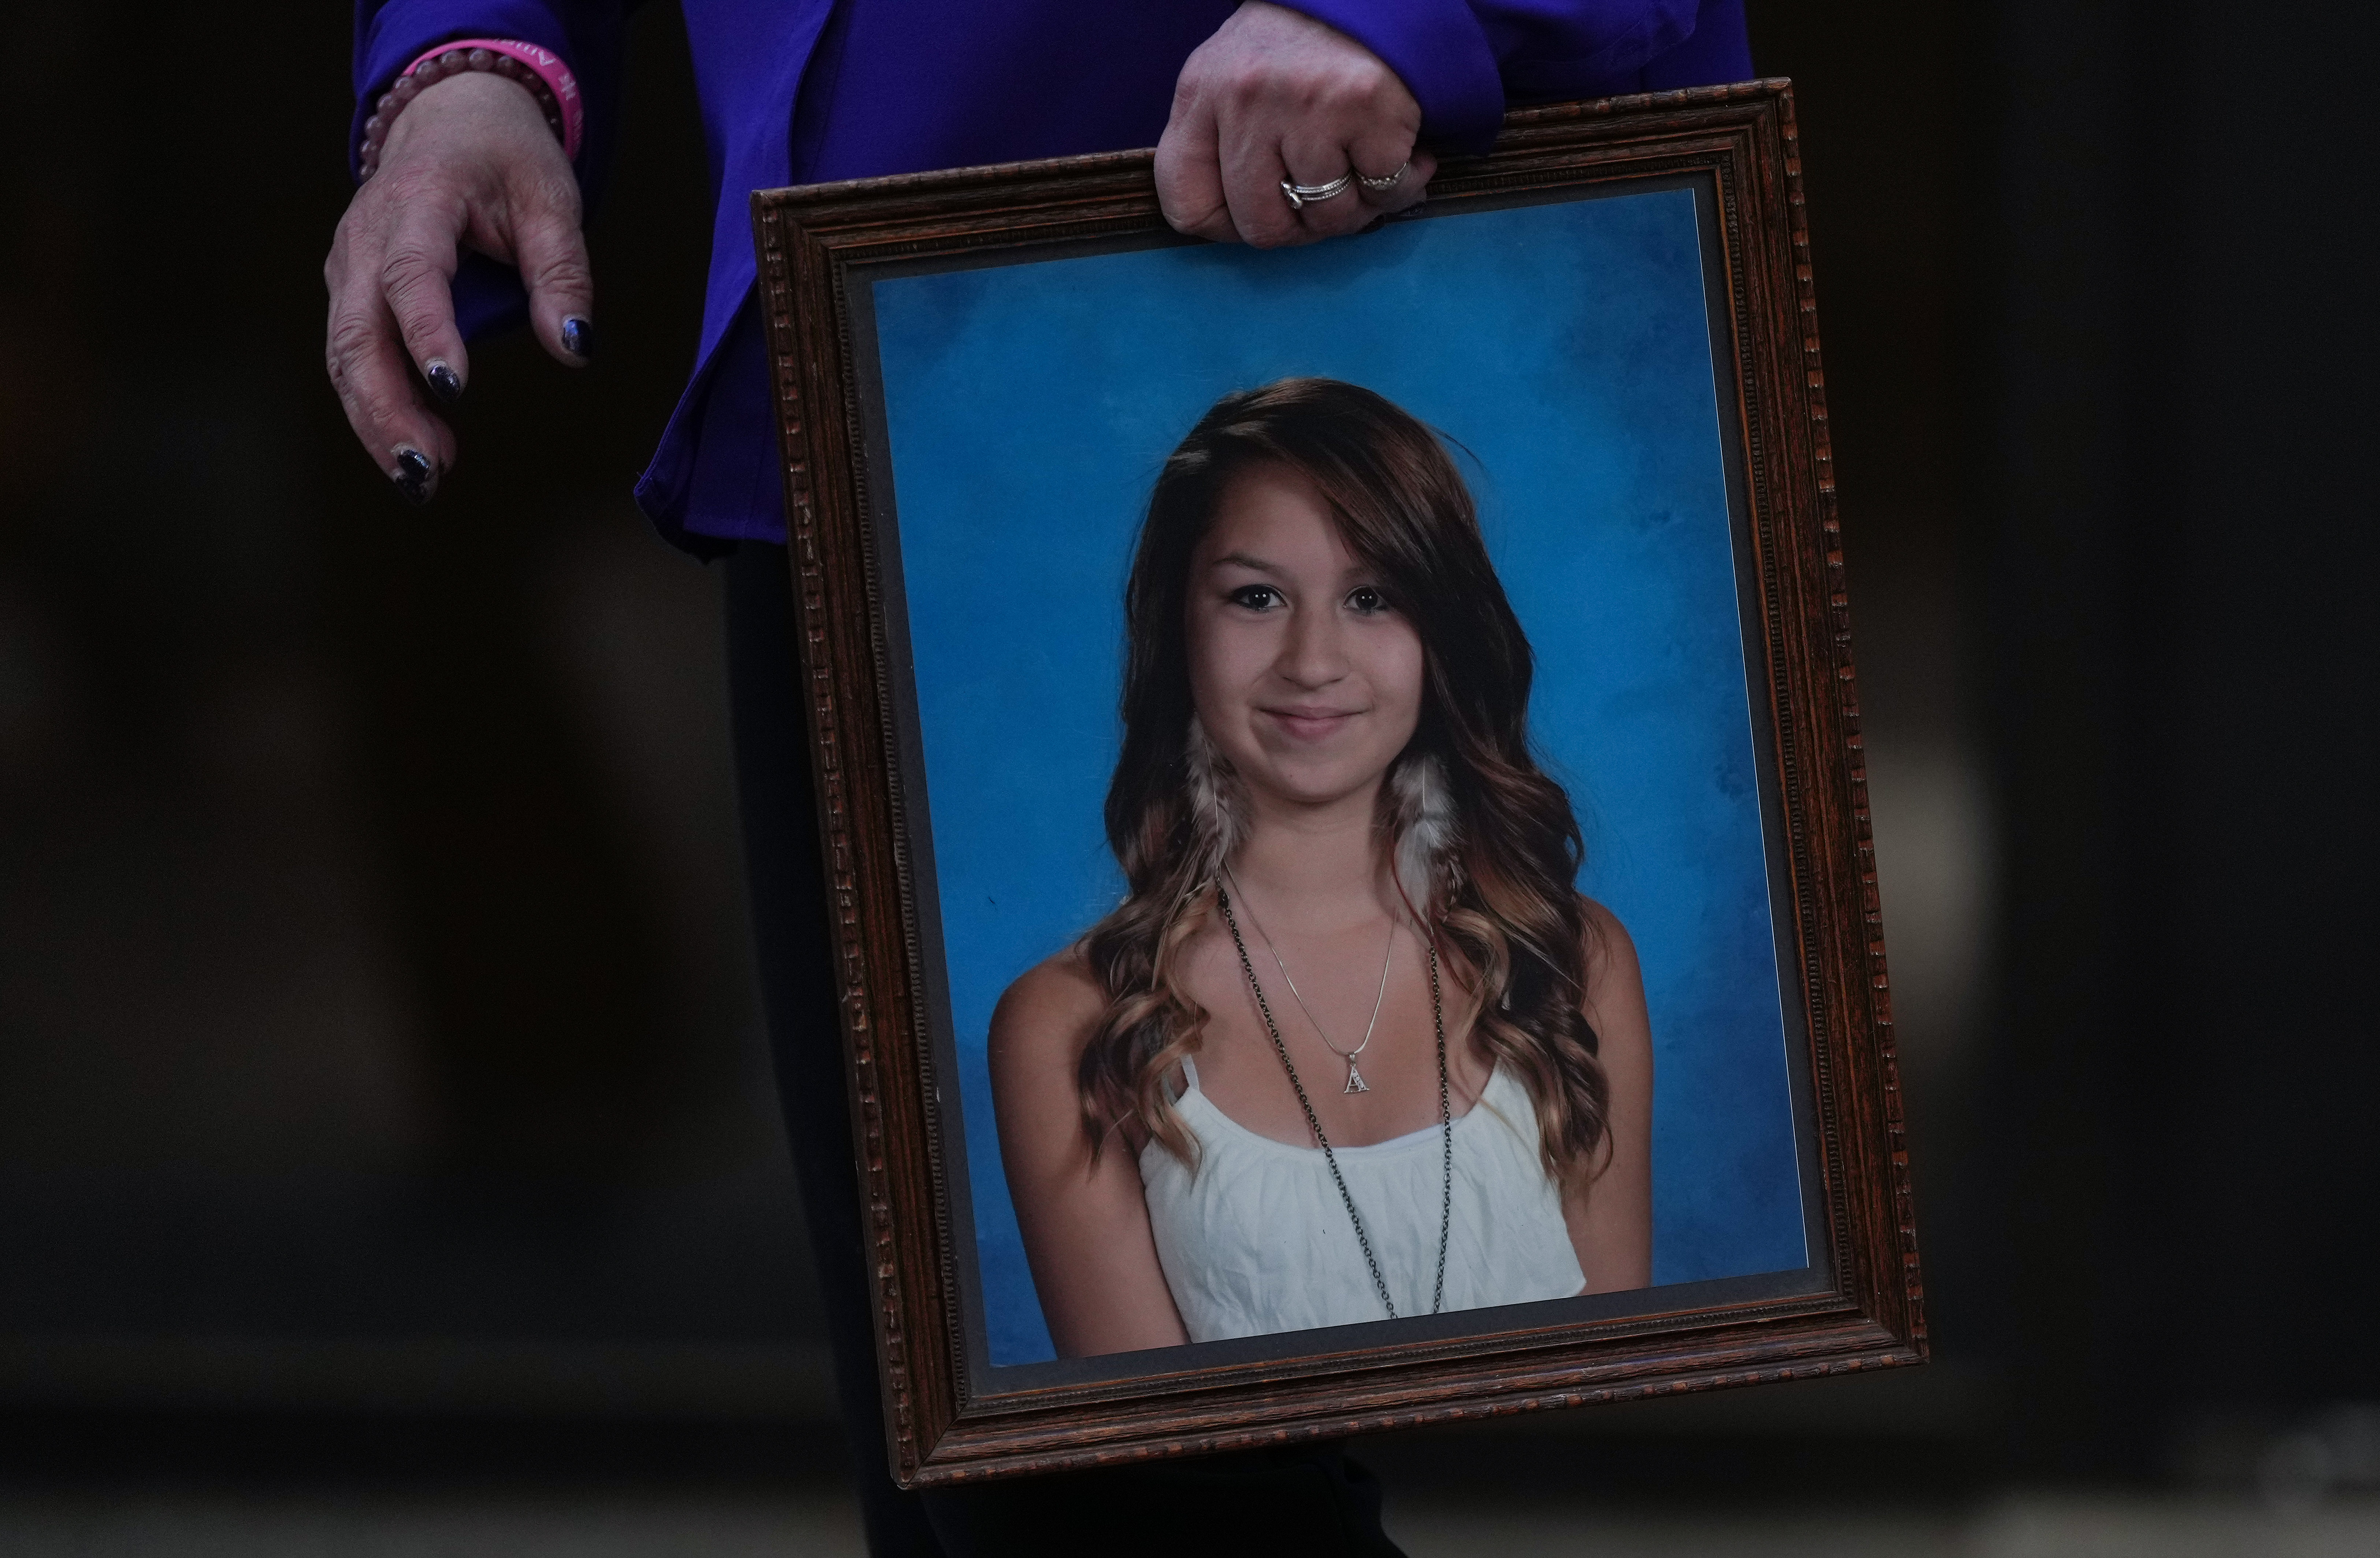 Dutch court sentences man convicted in Amanda Todd case to 6 years